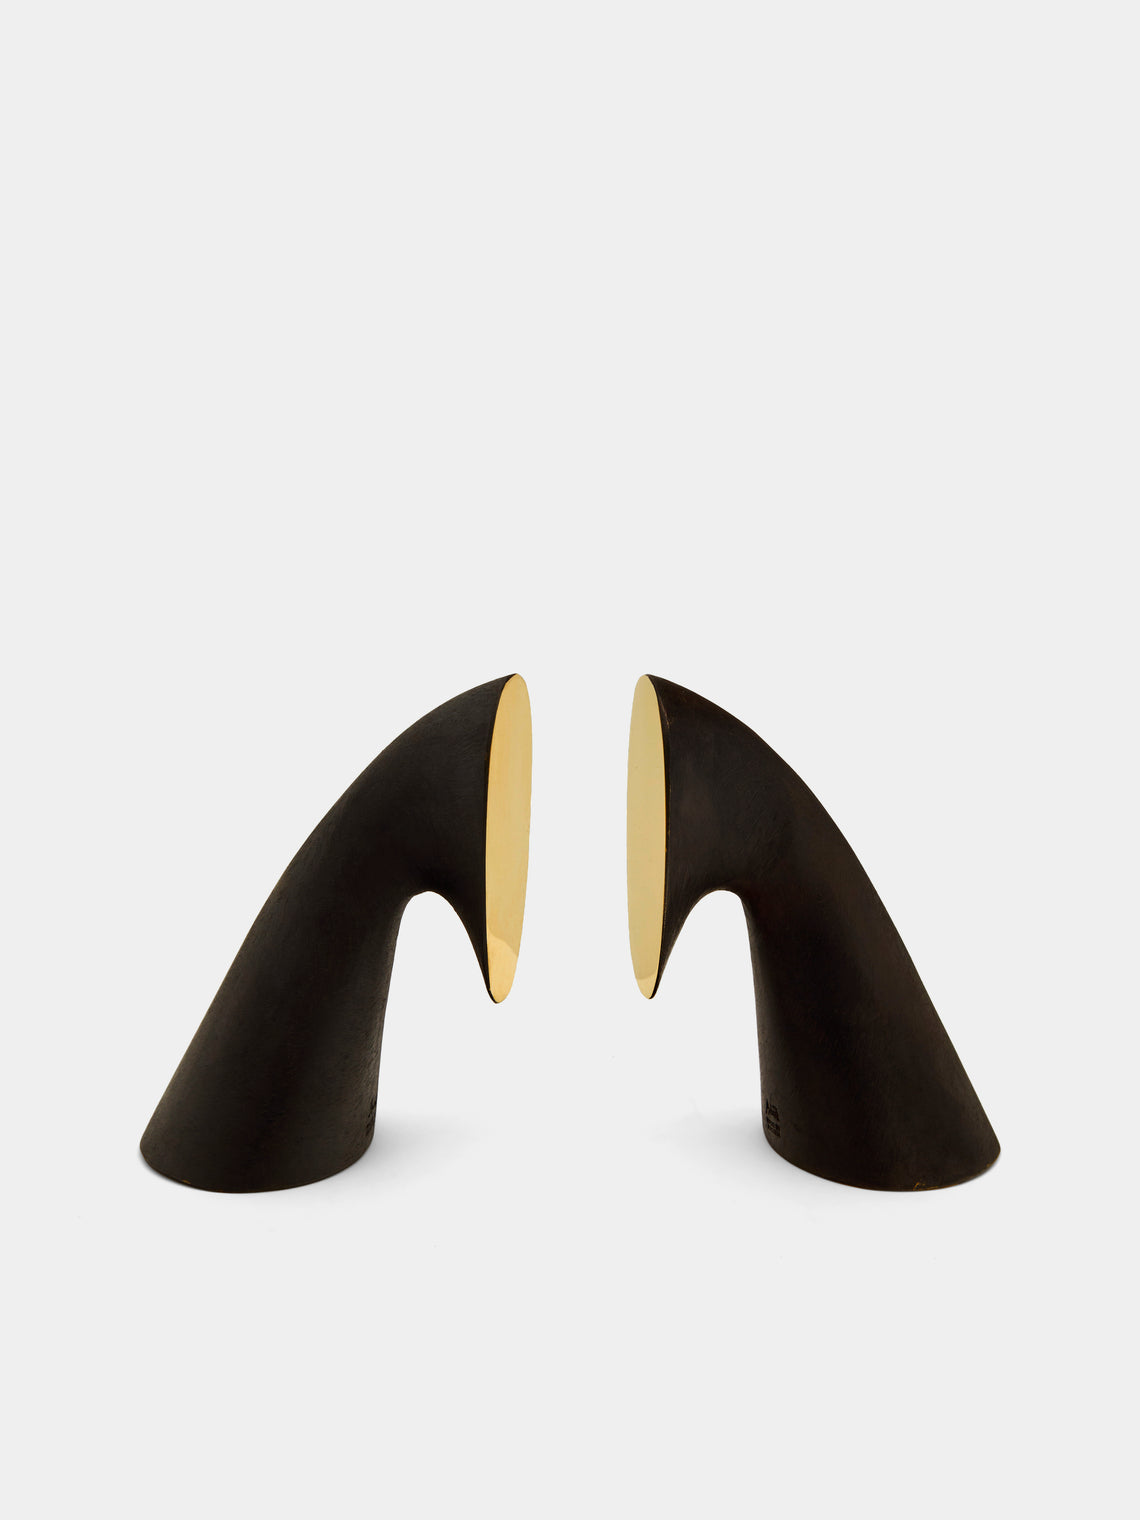 Carl Auböck - Brass Painted Bookends - Black - ABASK - 